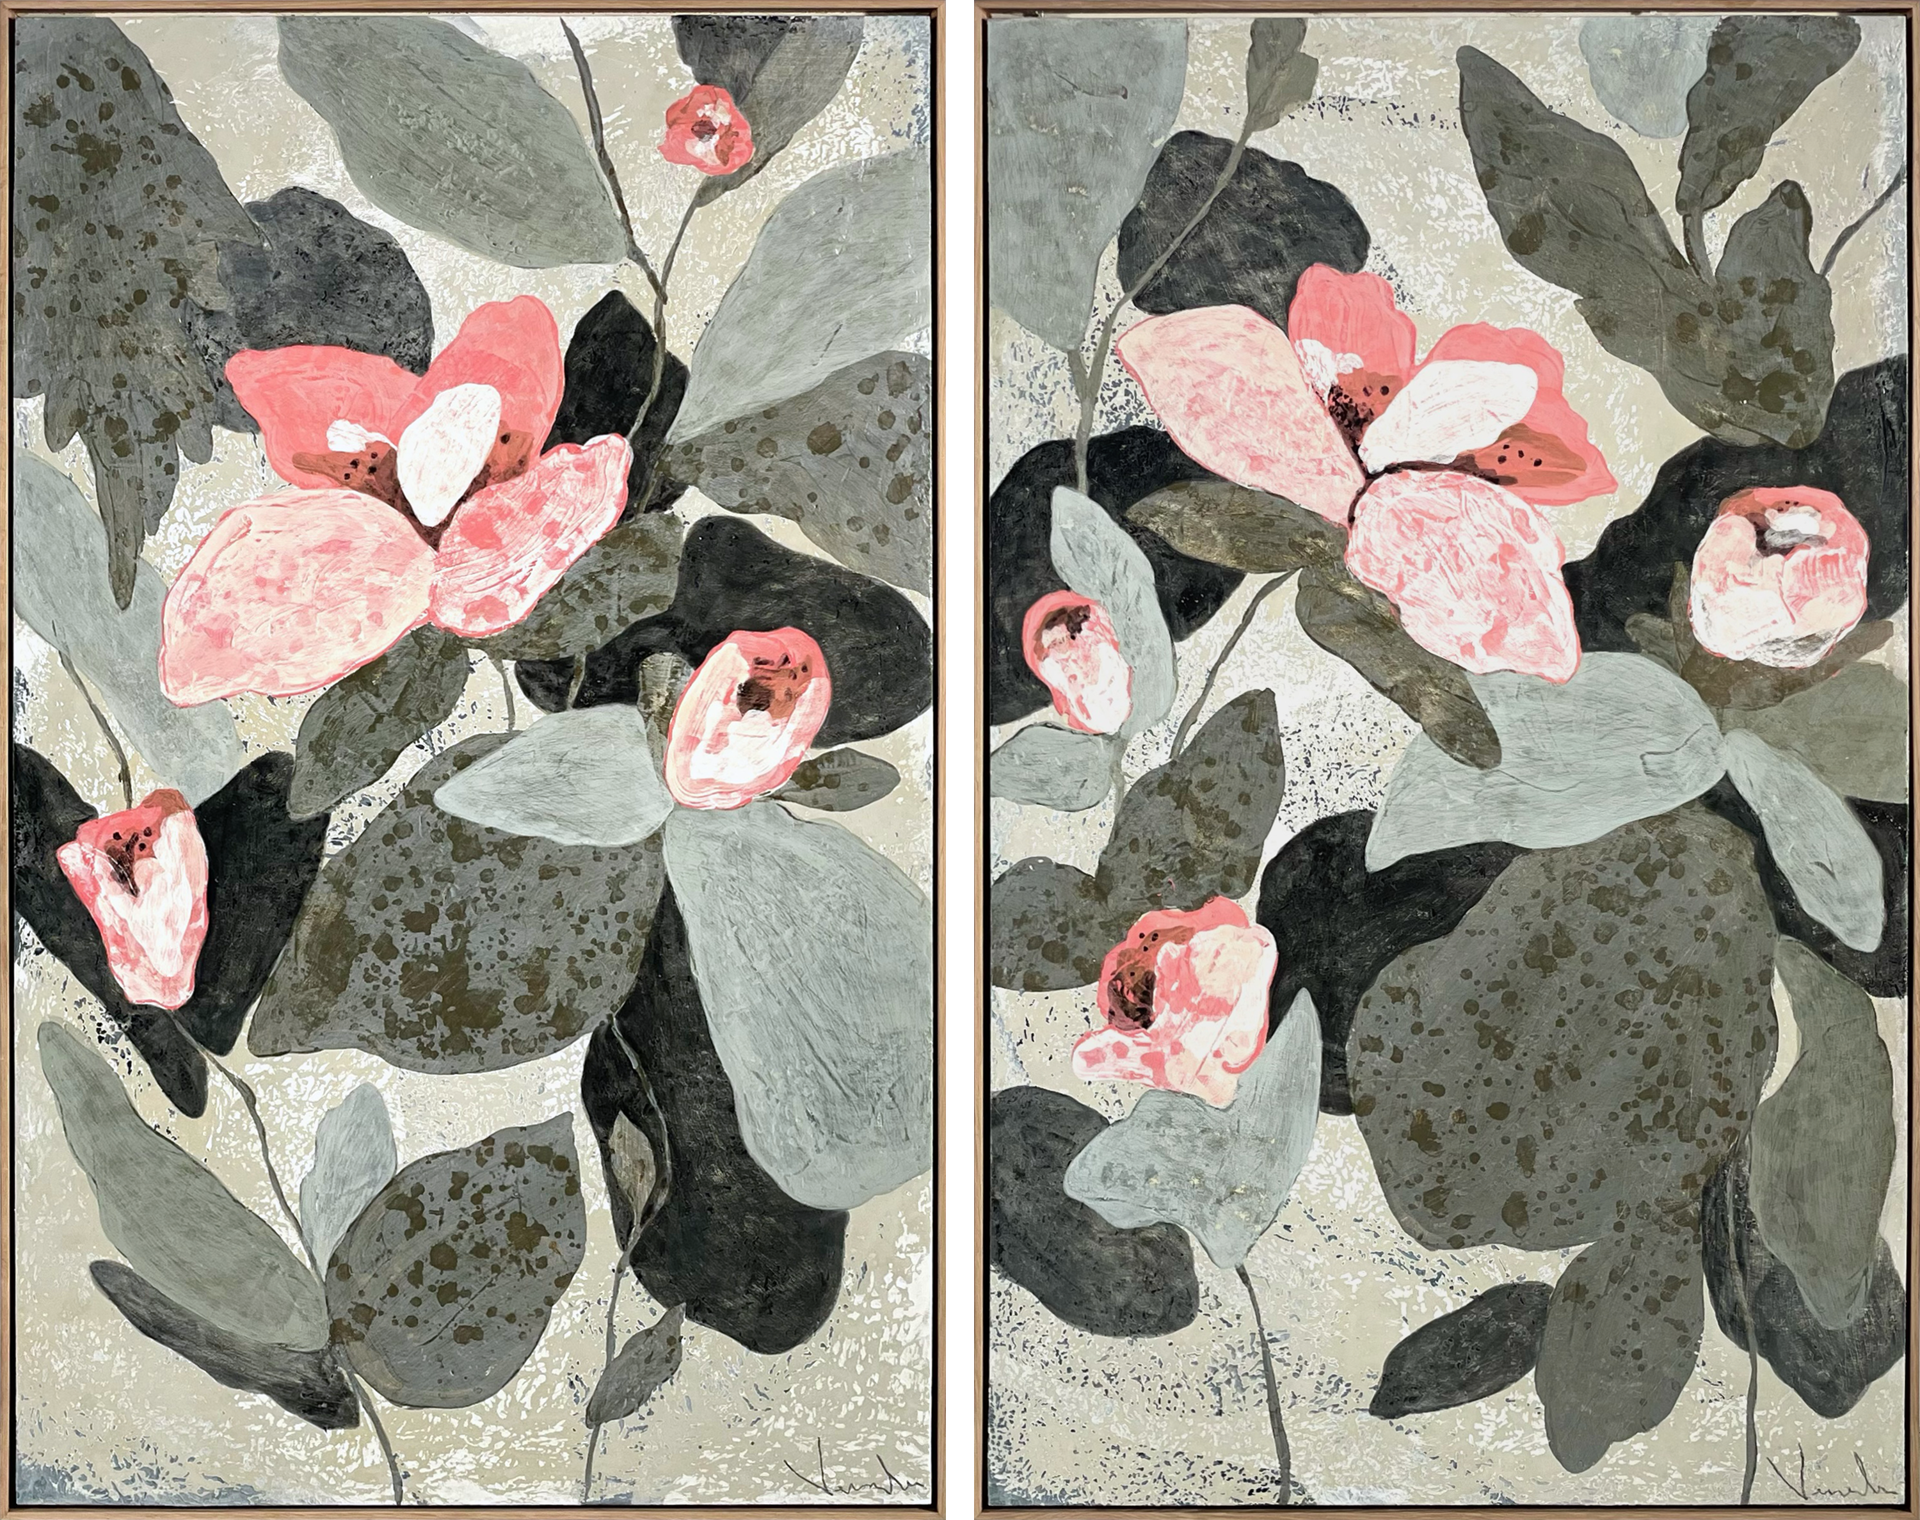 Quiet Moments 7 & 8 (Diptych) are a pair of mirroring paintings, by Vesela Baker, both 48"H x 30"W and made of acrylic on wood.